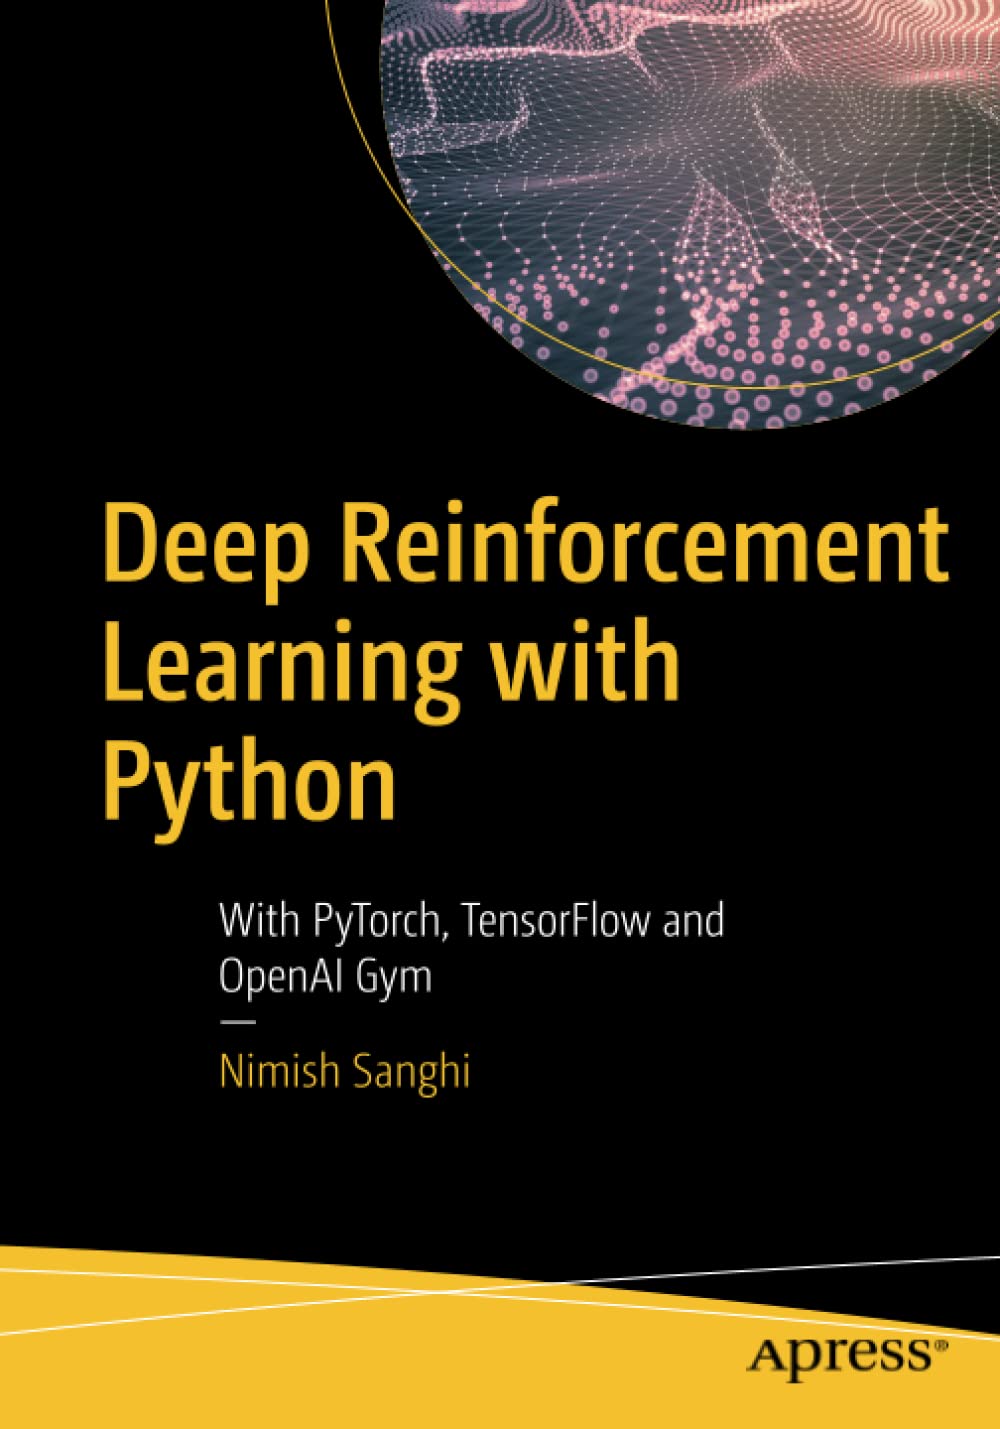 Deep Reinforcement Learning with Python: With PyTorch